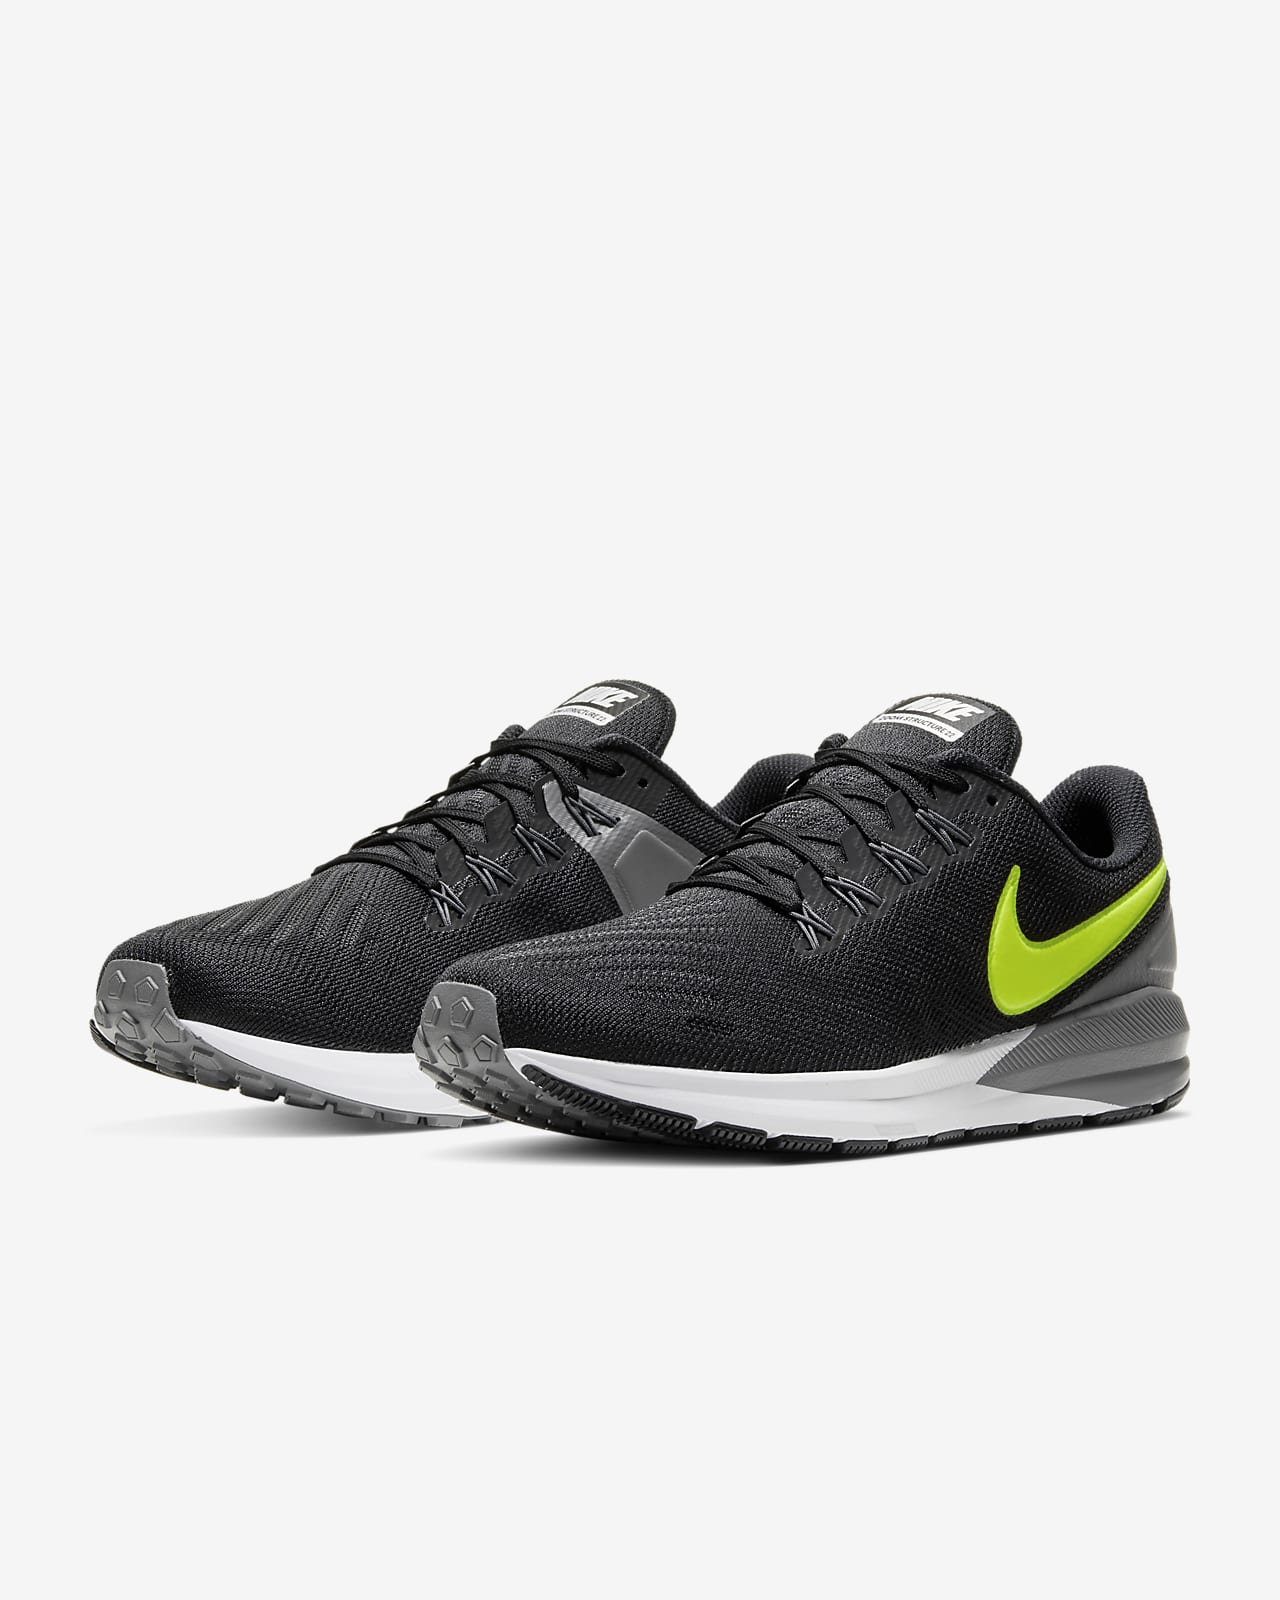 nike air zoom structure 22 men's running shoe